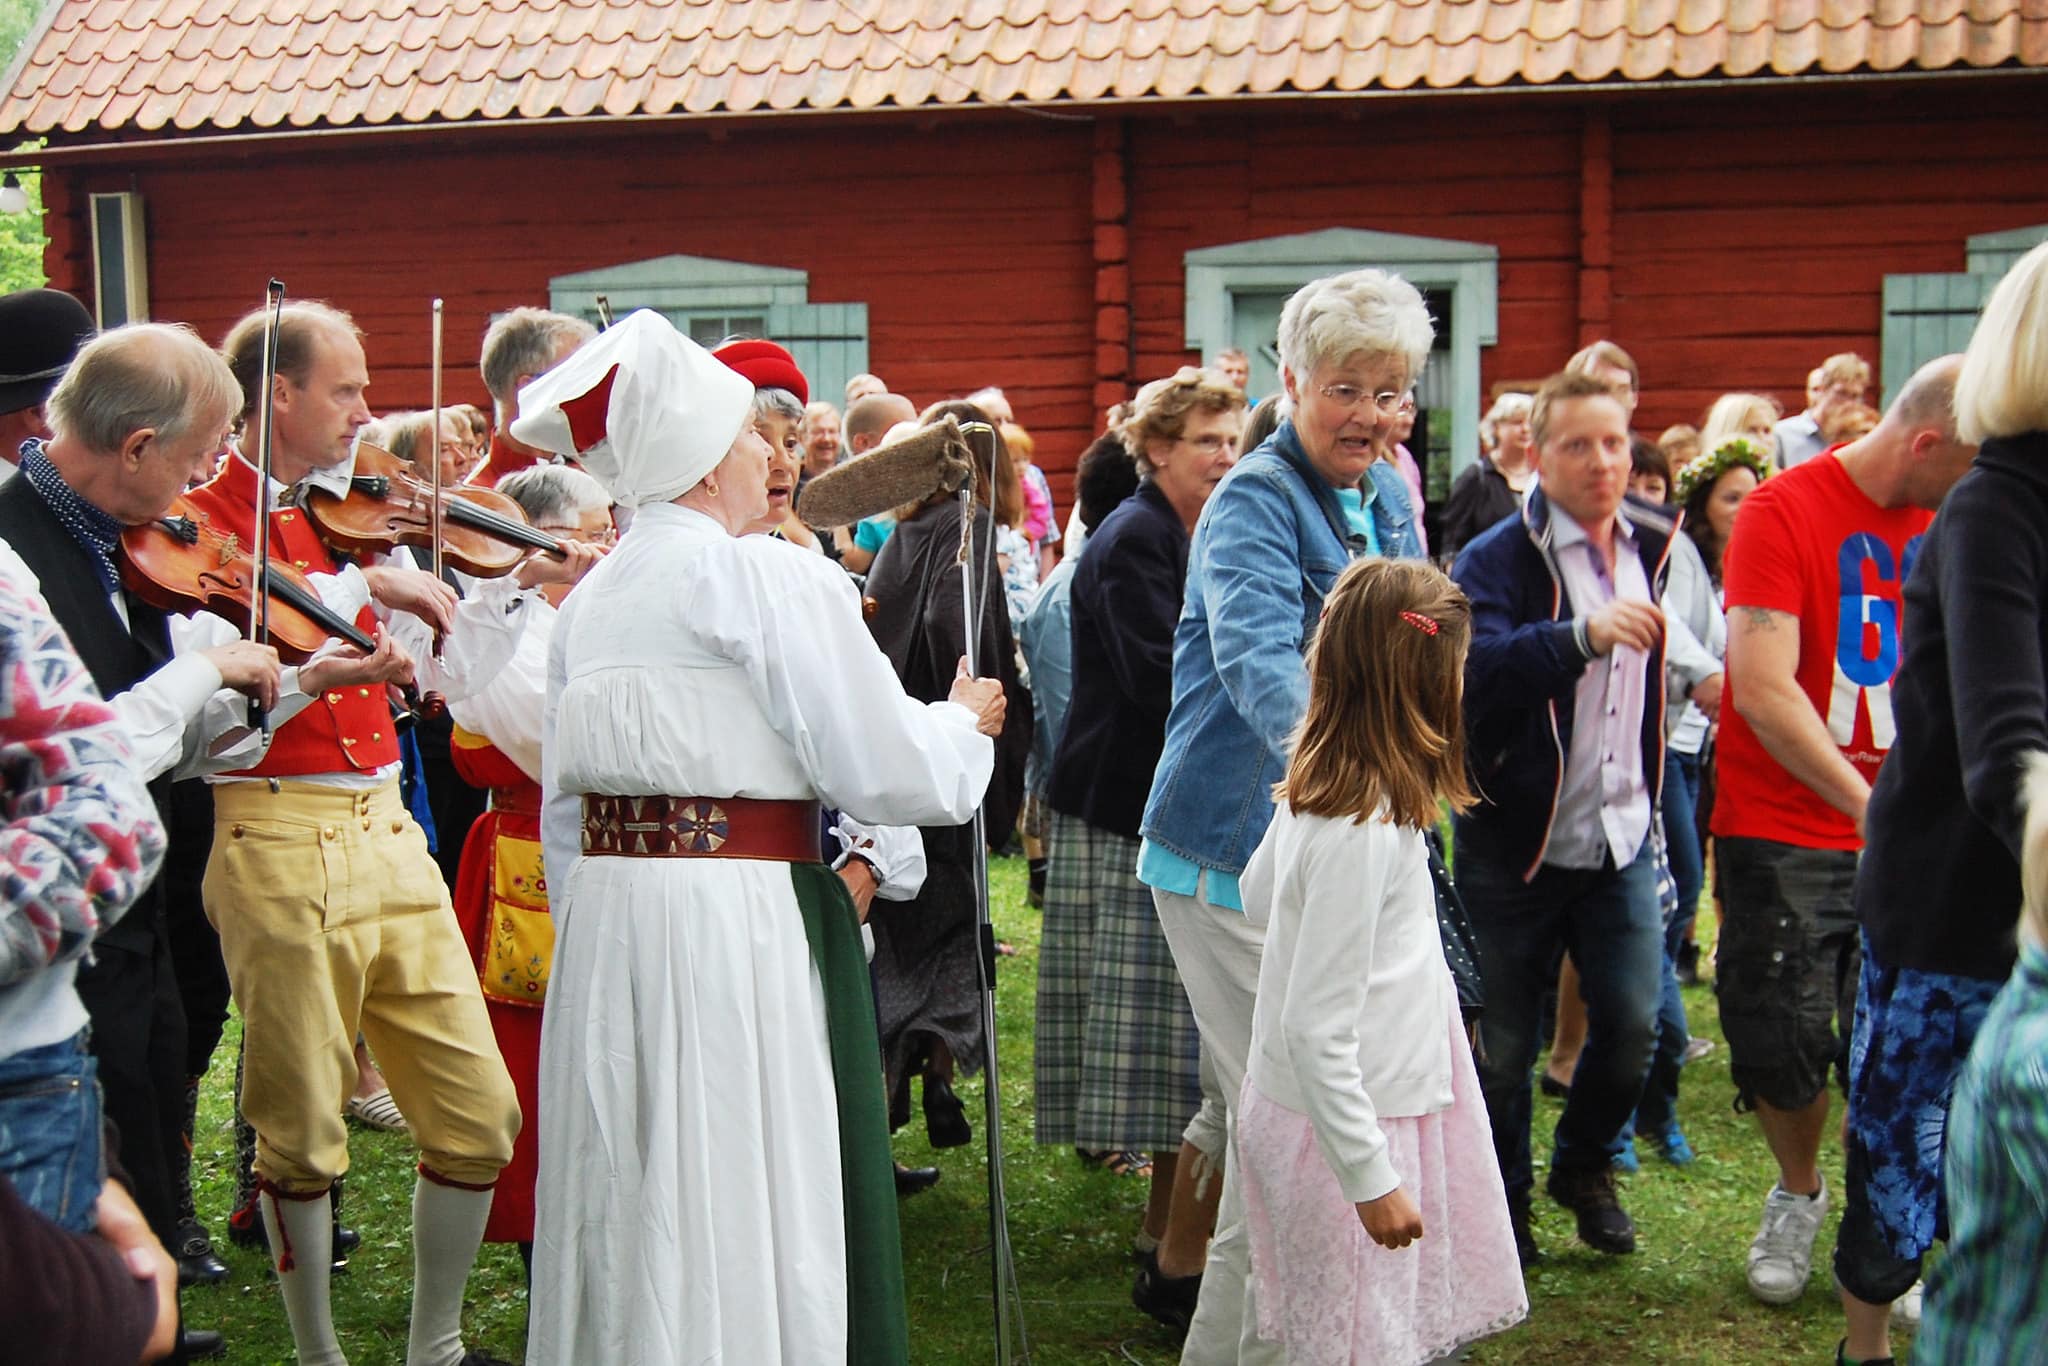 Midsummer, or Midsommar, is perhaps the best known holiday in Denmark. There is almost no more typical tradition than this. So do like the Danes and celebrate the start of the summer!